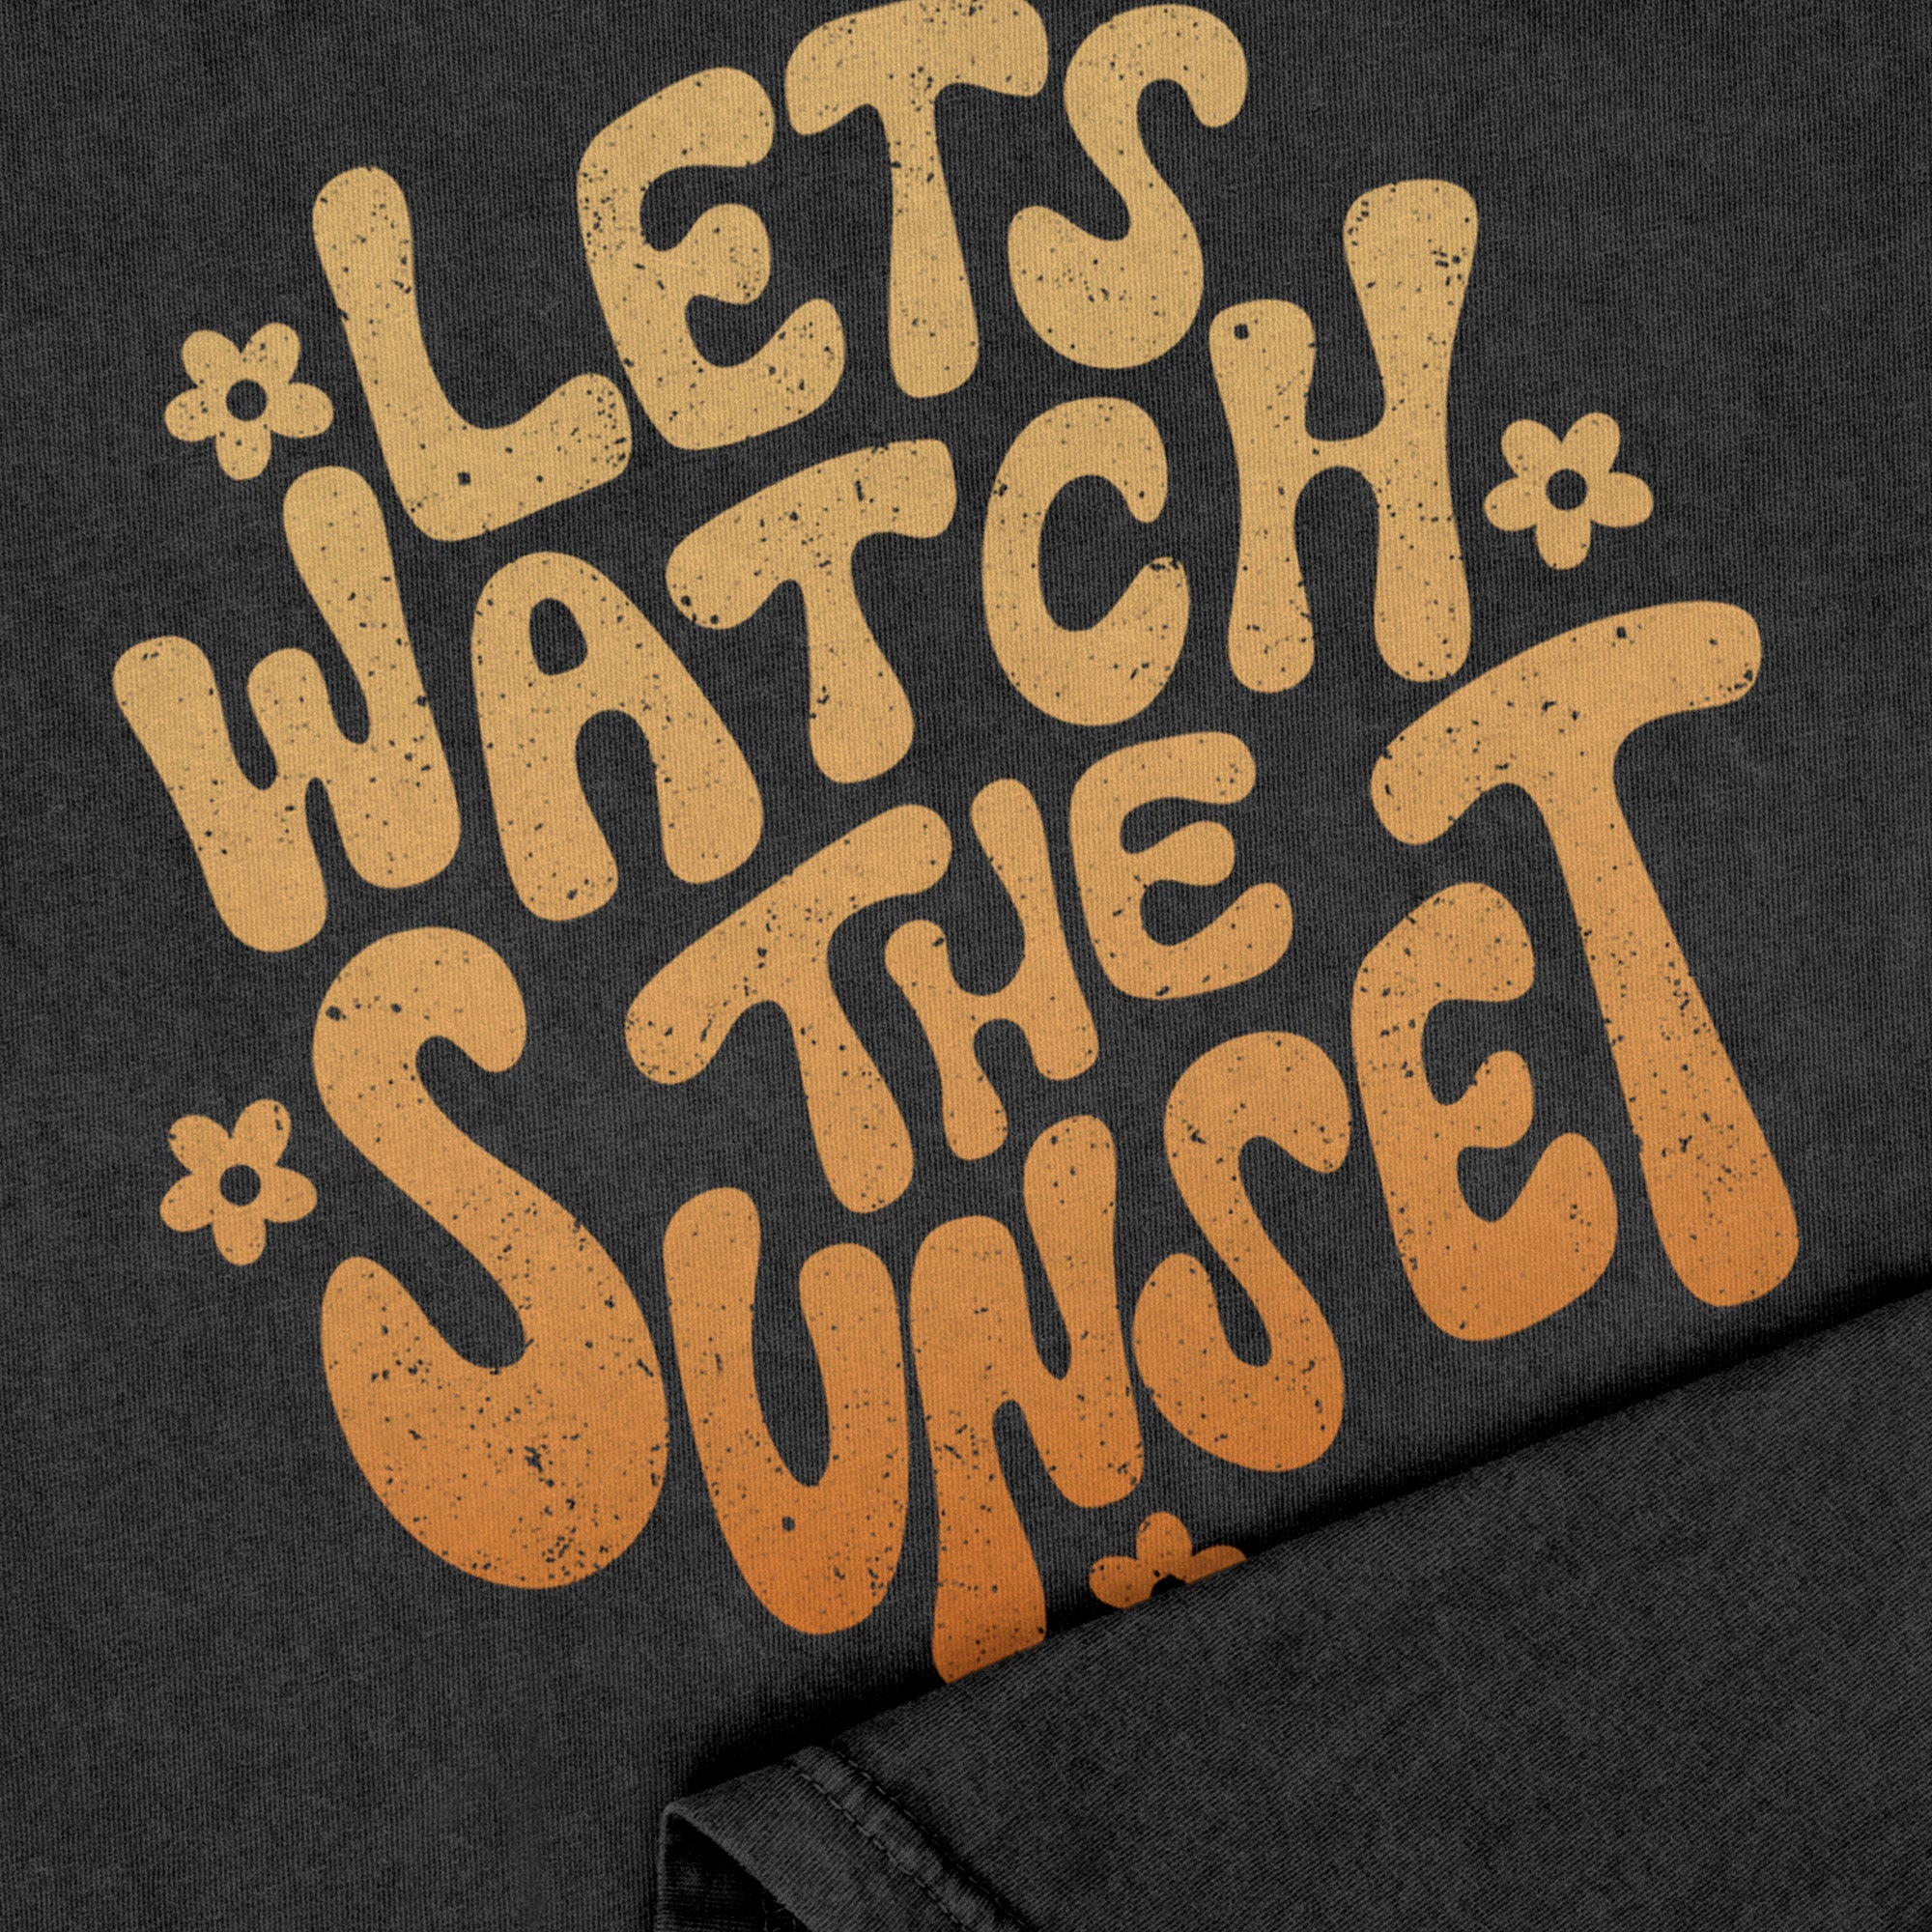 Let's Watch the Sunset Oversized Shirt for Women & Men Garment-Dyed Graphic Tee